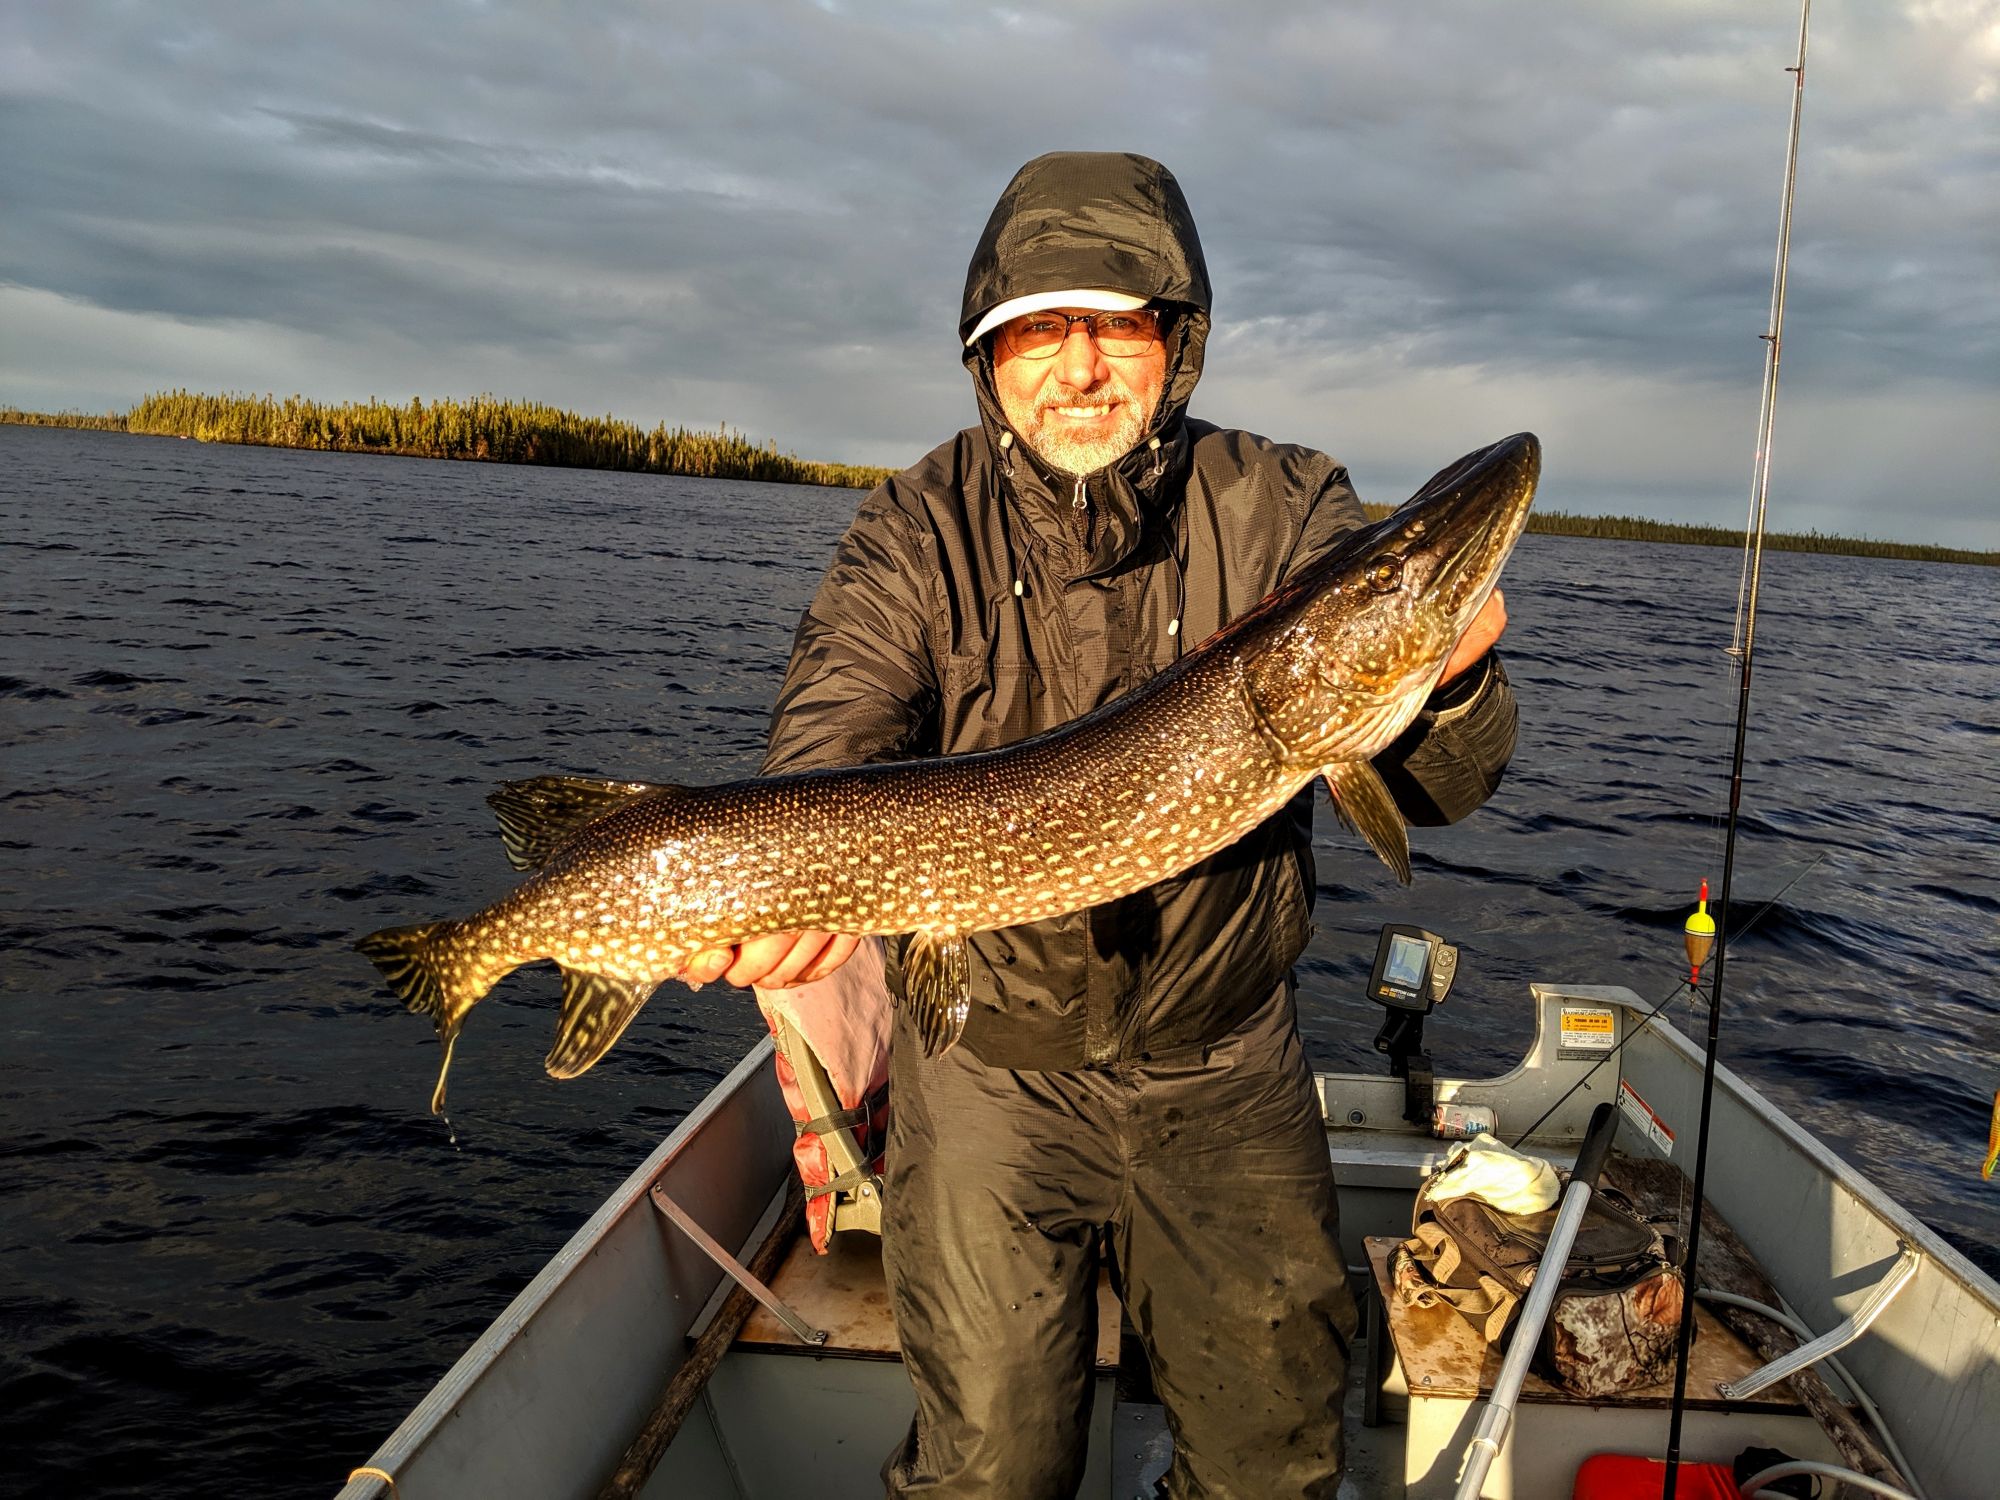 Congratulations to Squadrito Group for this beautiful 39 in Northern Pike!